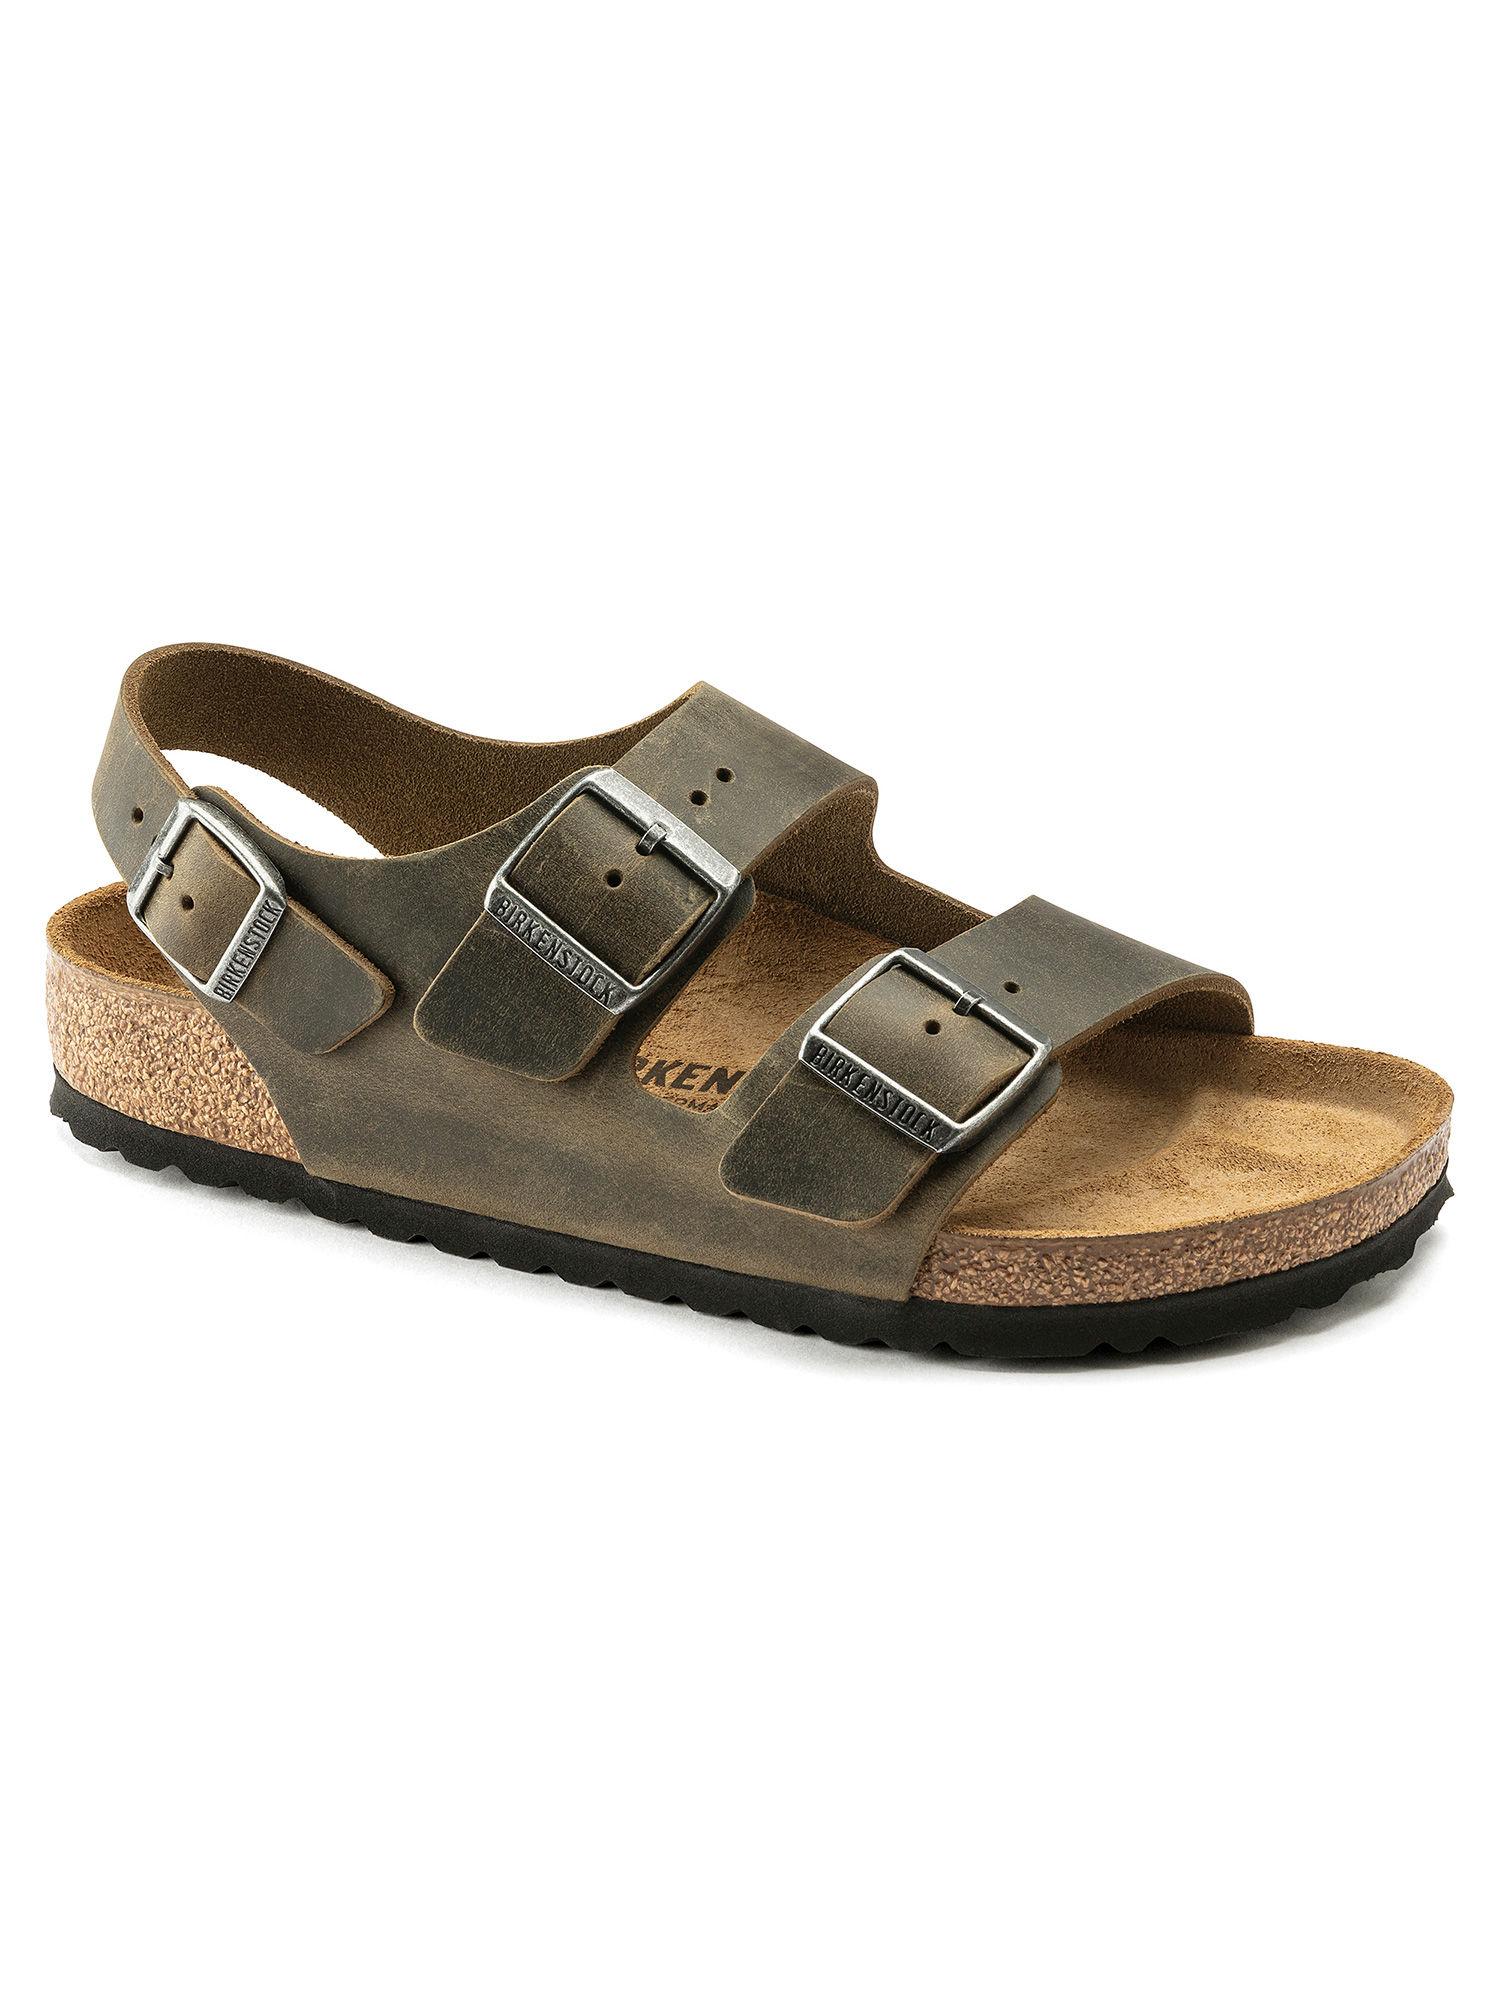 milano-oiled-leather-green-regular-width-unisex-sandals